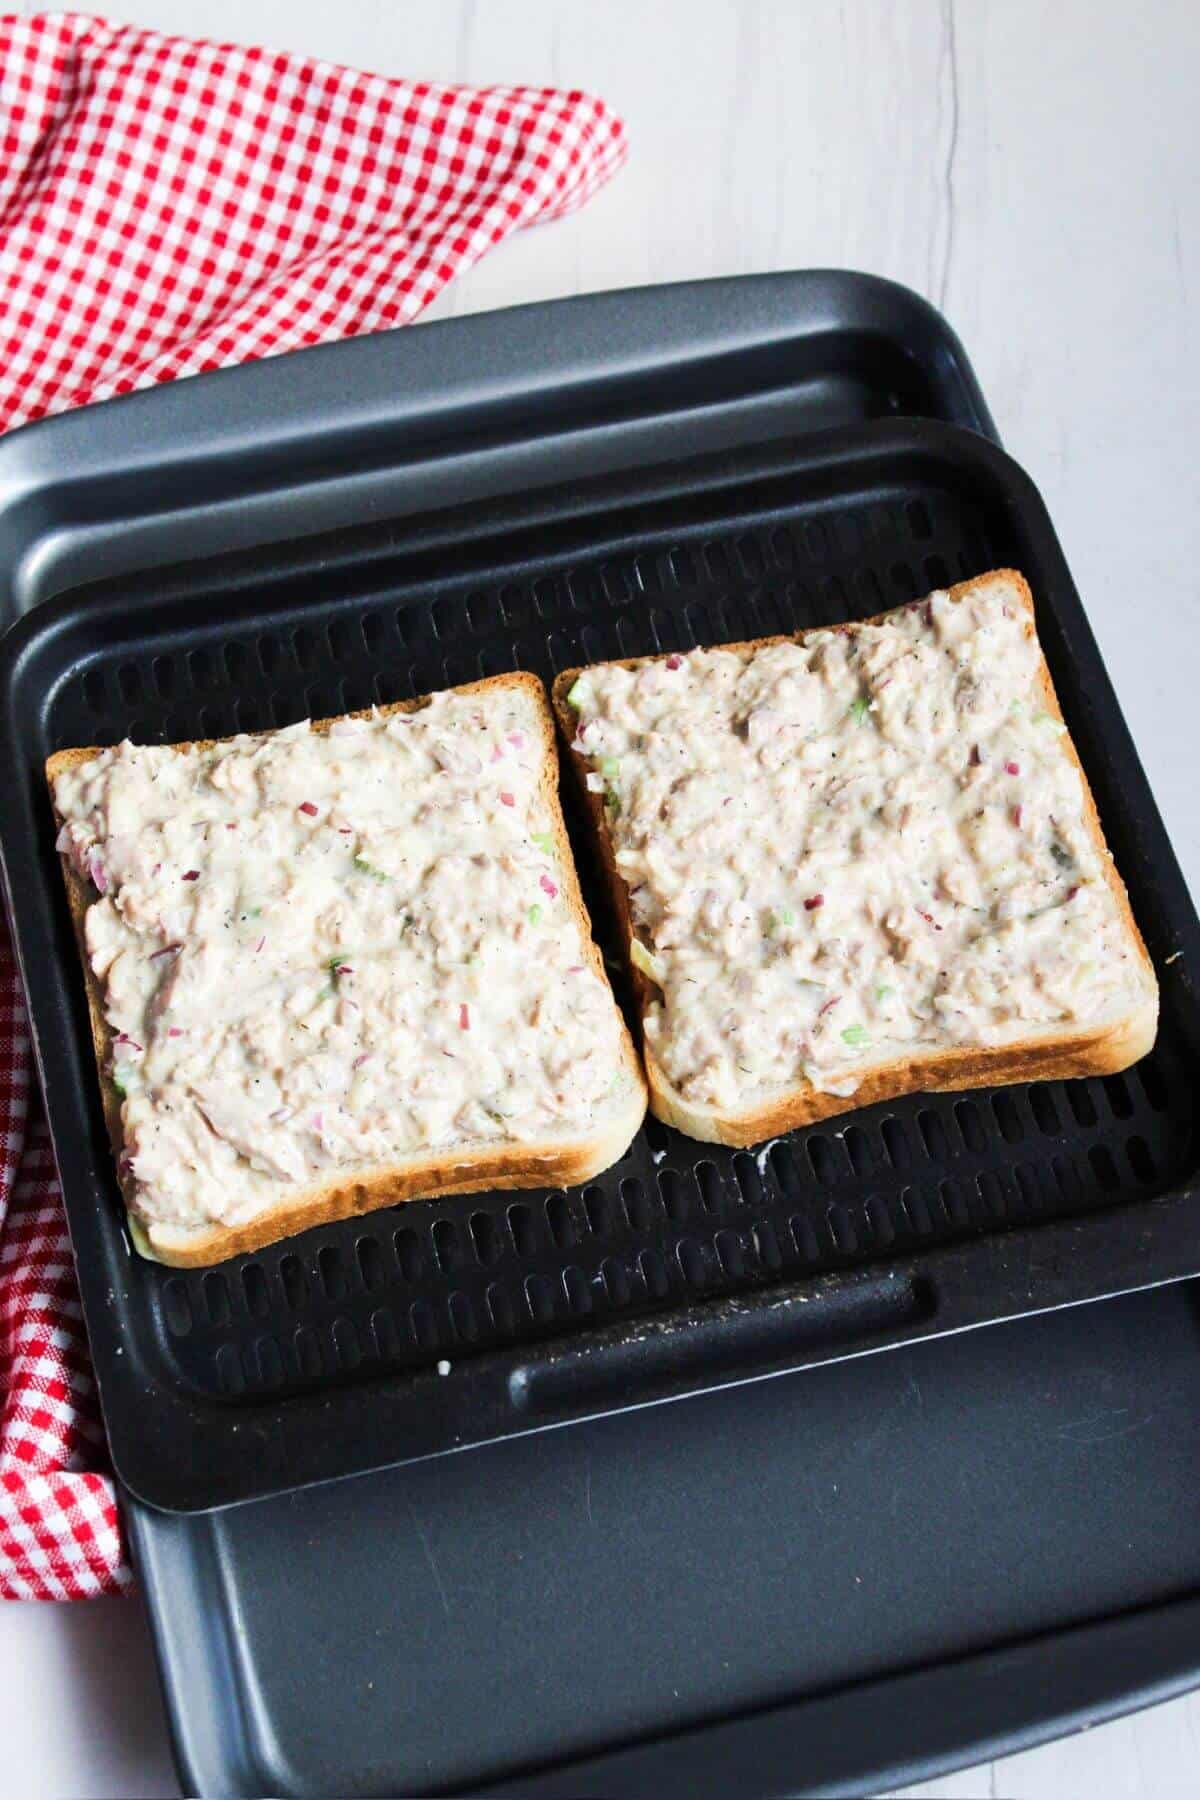 Two slices of bread topped with tuna mixture on air fryer tray.